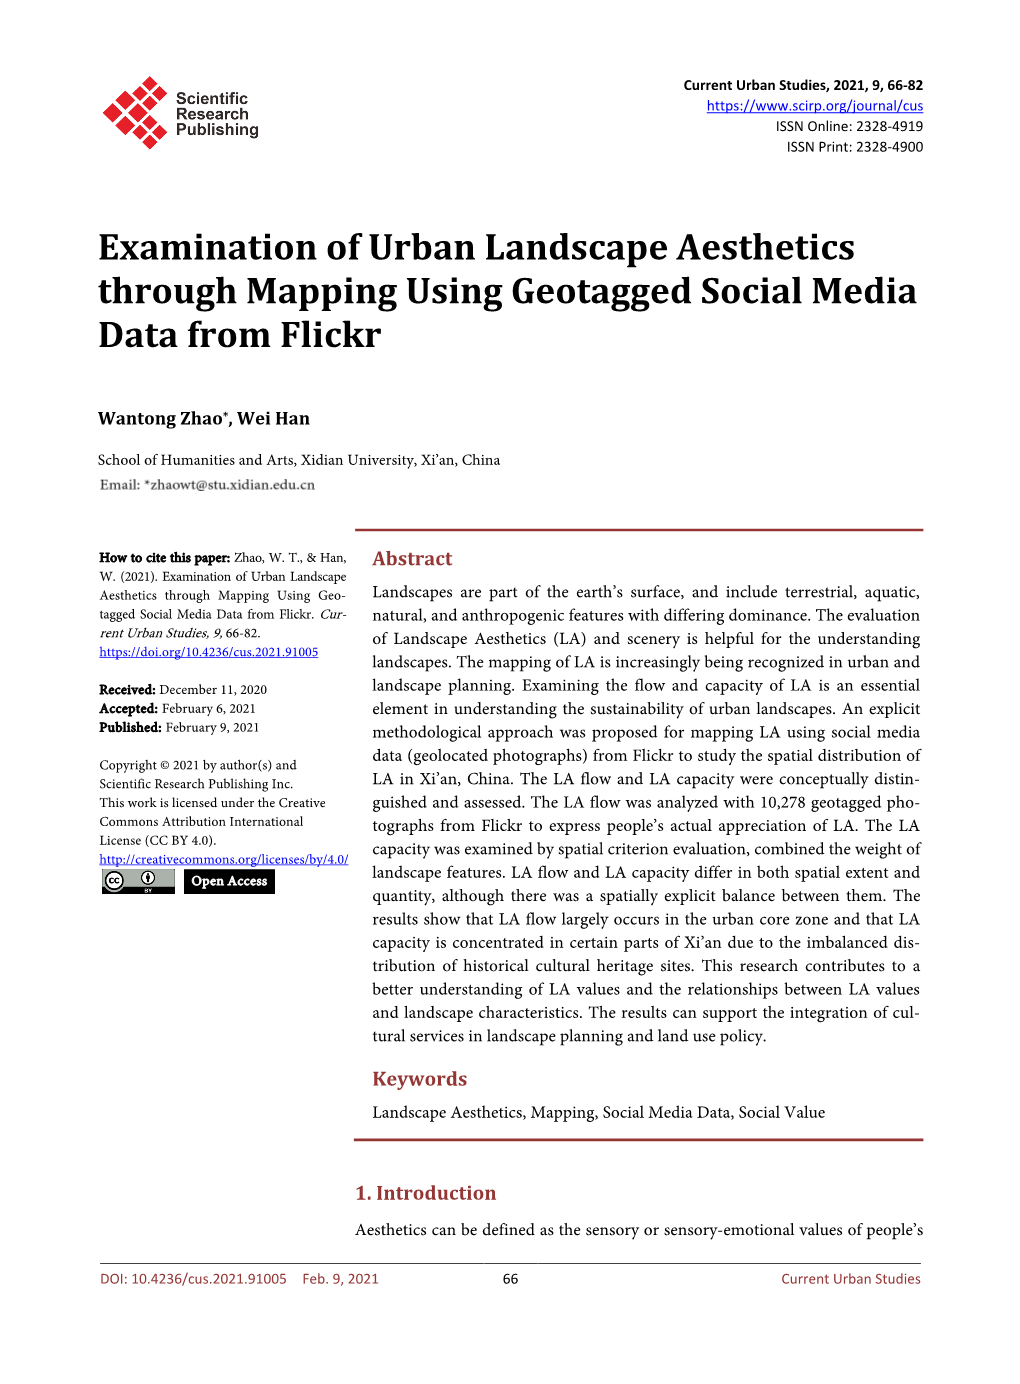 Examination of Urban Landscape Aesthetics Through Mapping Using Geotagged Social Media Data from Flickr